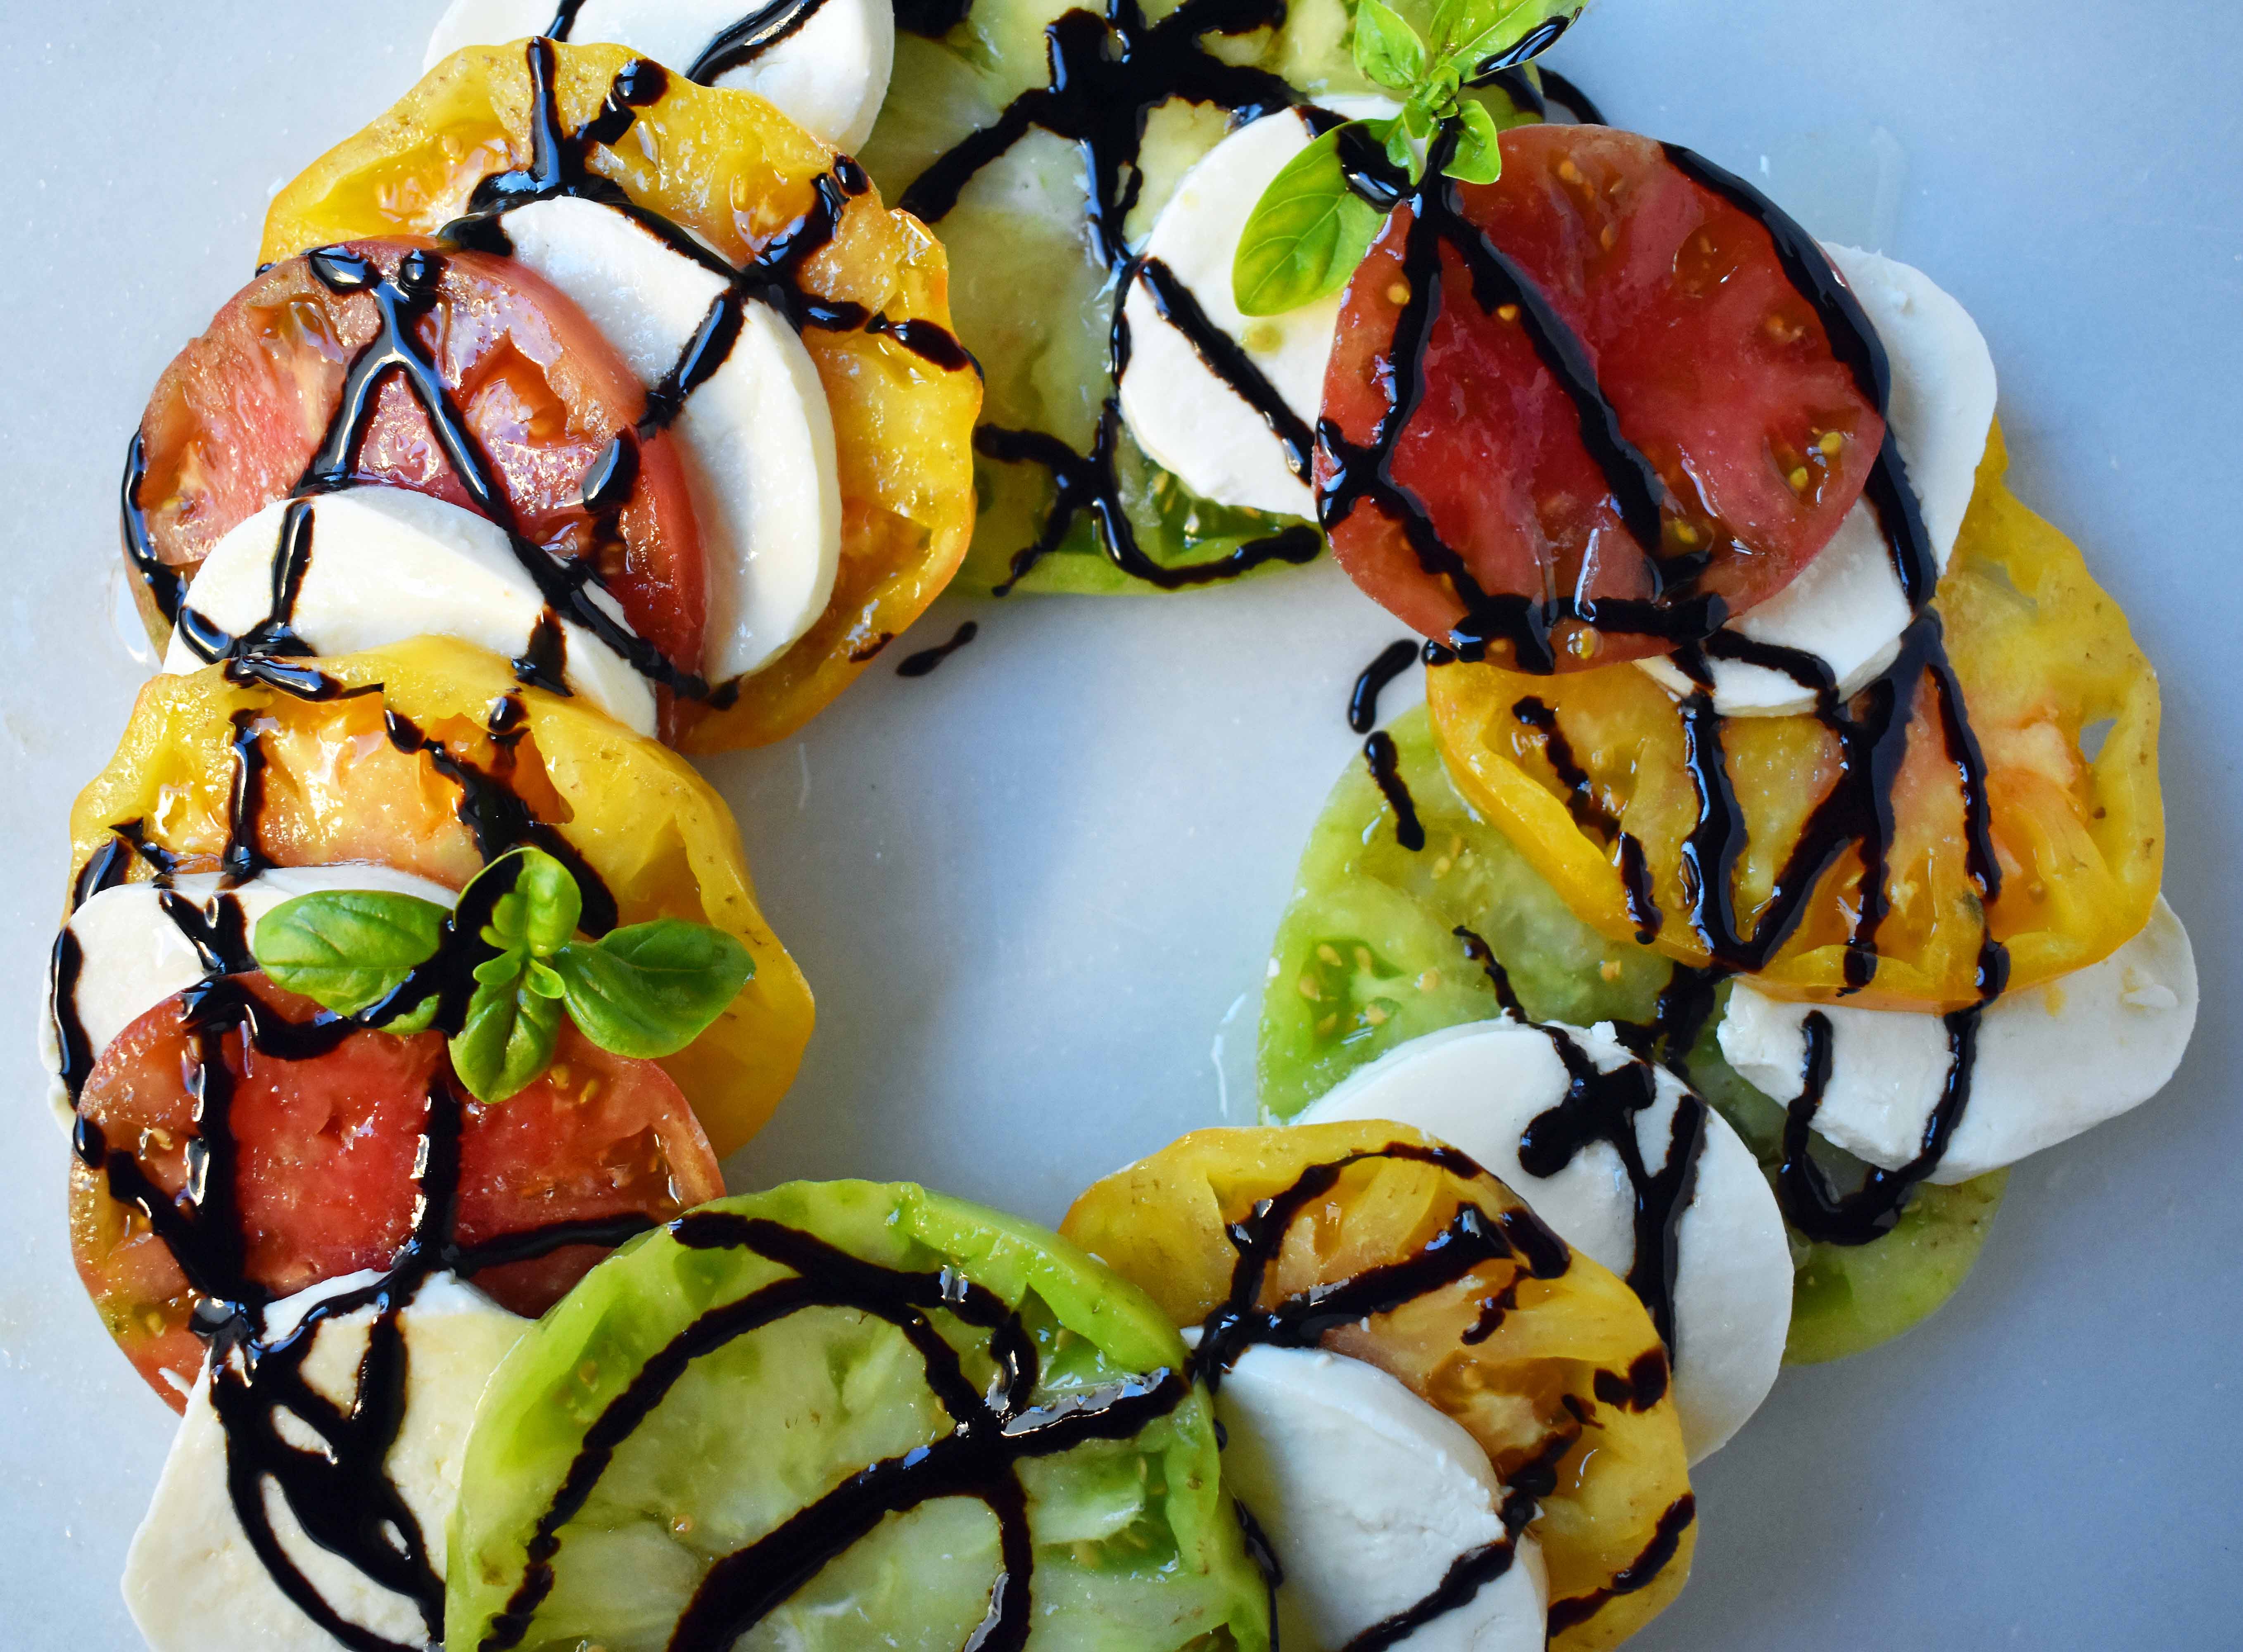 Heirloom Tomato Caprese Salad by Modern Honey. Garden Heirloom tomatoes layered with fresh mozzarella slices, extra virgin olive oil, balsamic glaze, salt, and fresh basil. A beautiful and healthy appetizer. www.modernhoney.com